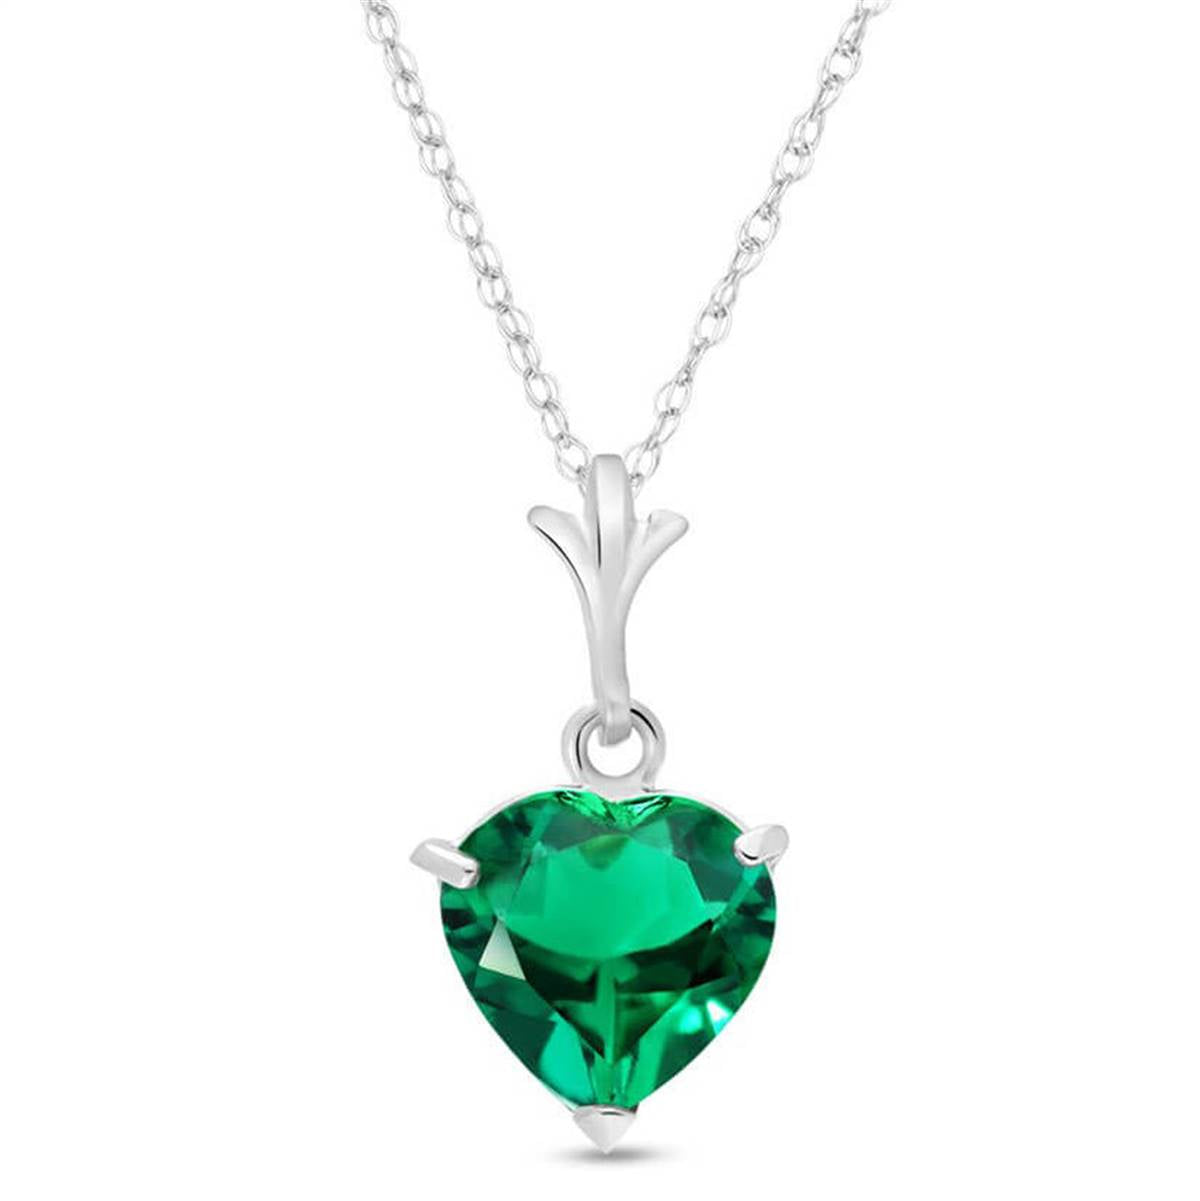 14K Solid White Gold Necklace With Heart Shape 1.00 ctw High Polished Genuine Emerald - Grade AAA